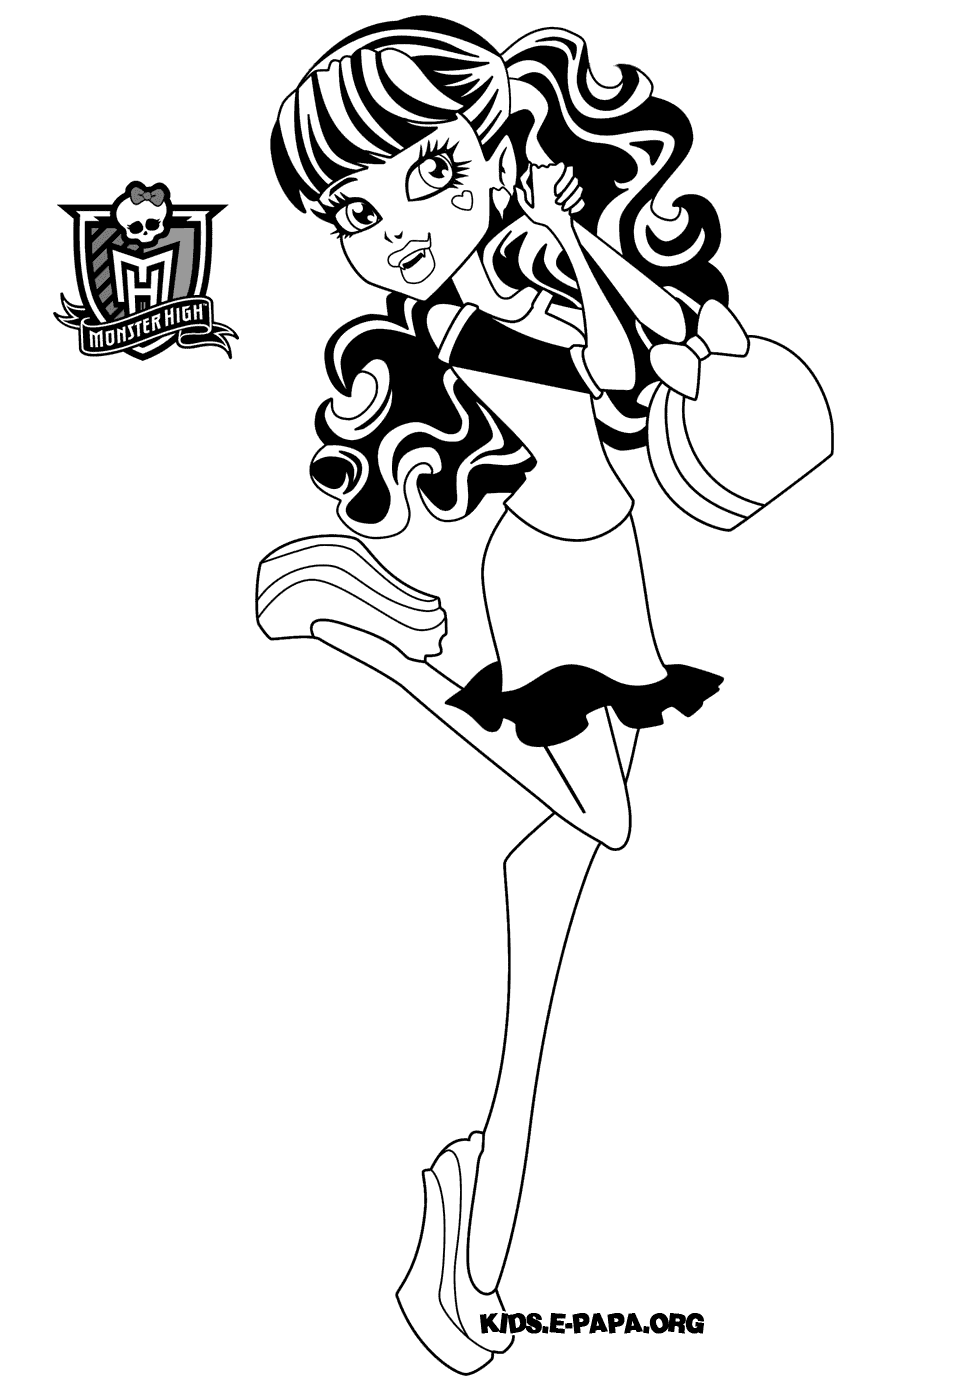 Drawing Monster High #24965 (Animation Movies) – Printable coloring pages